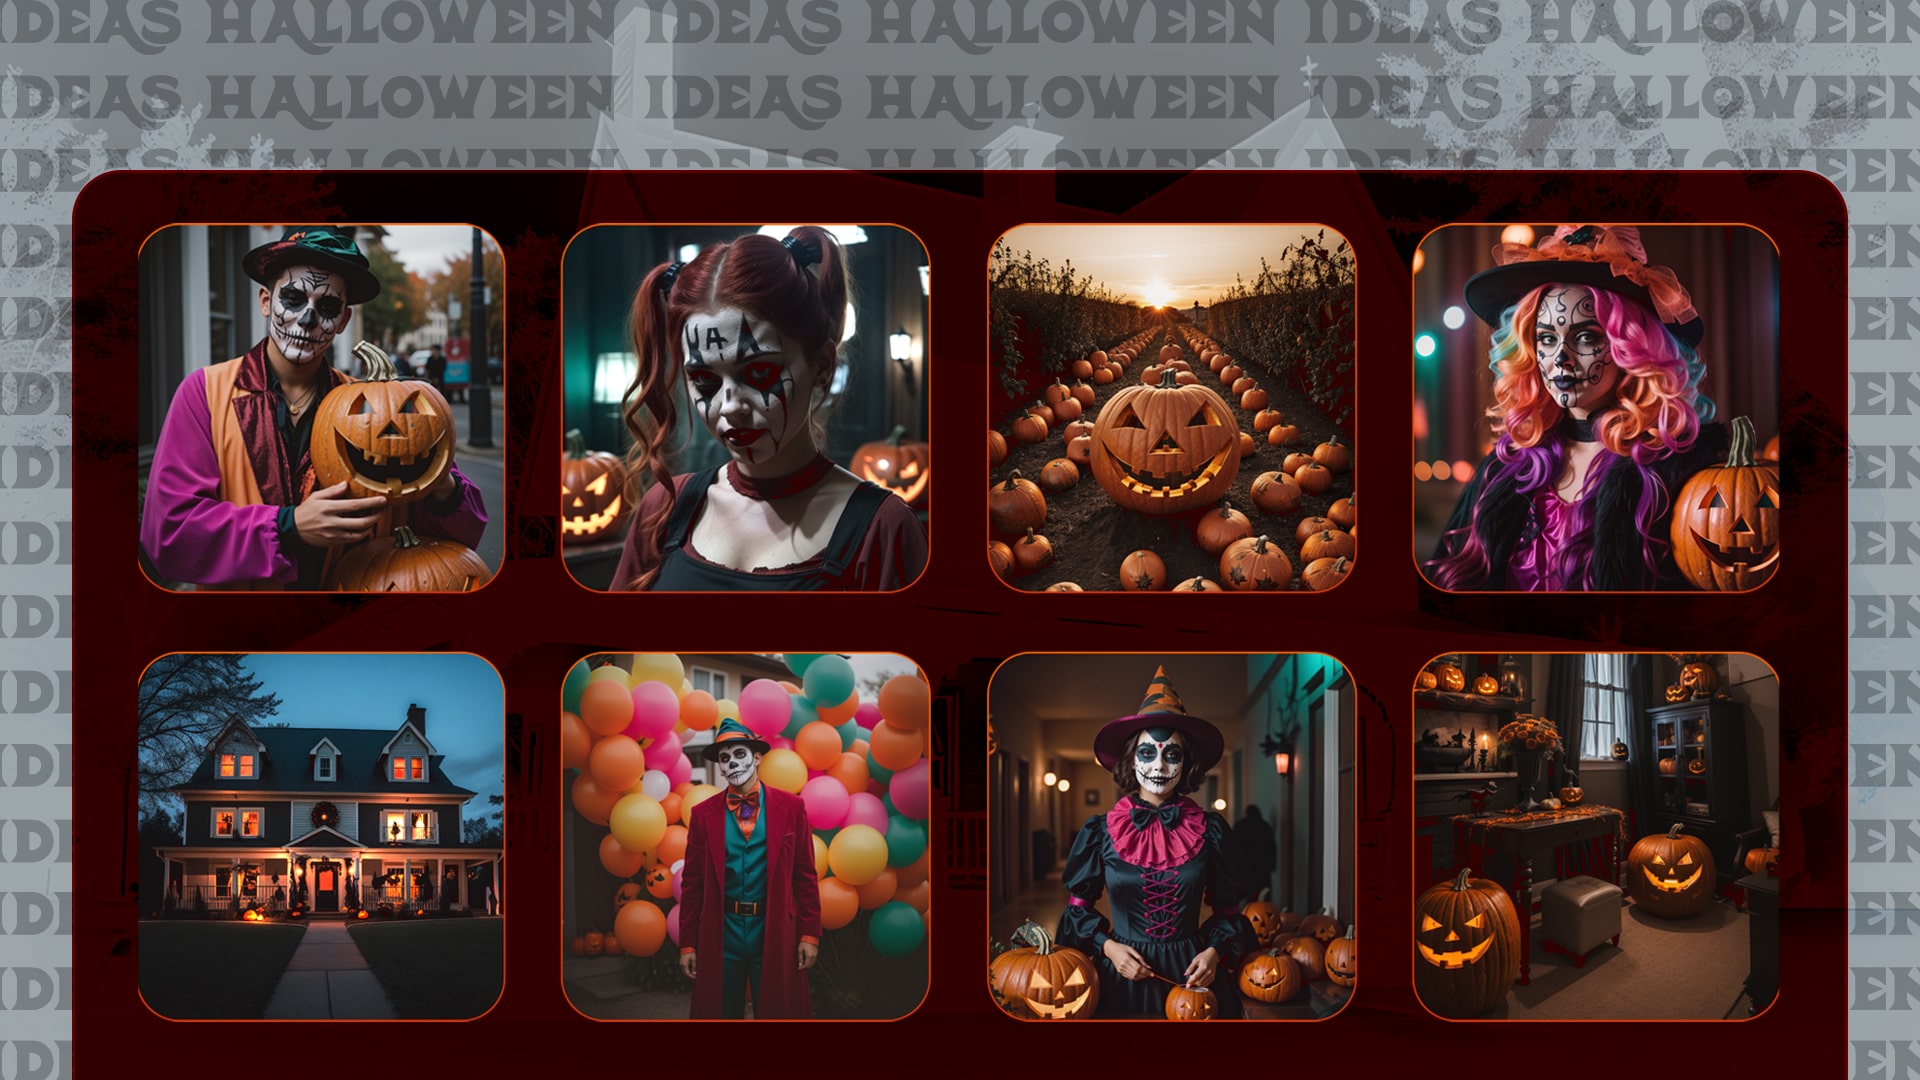 A collage of various Halloween-themed images generated by Imagine AI Art Generator